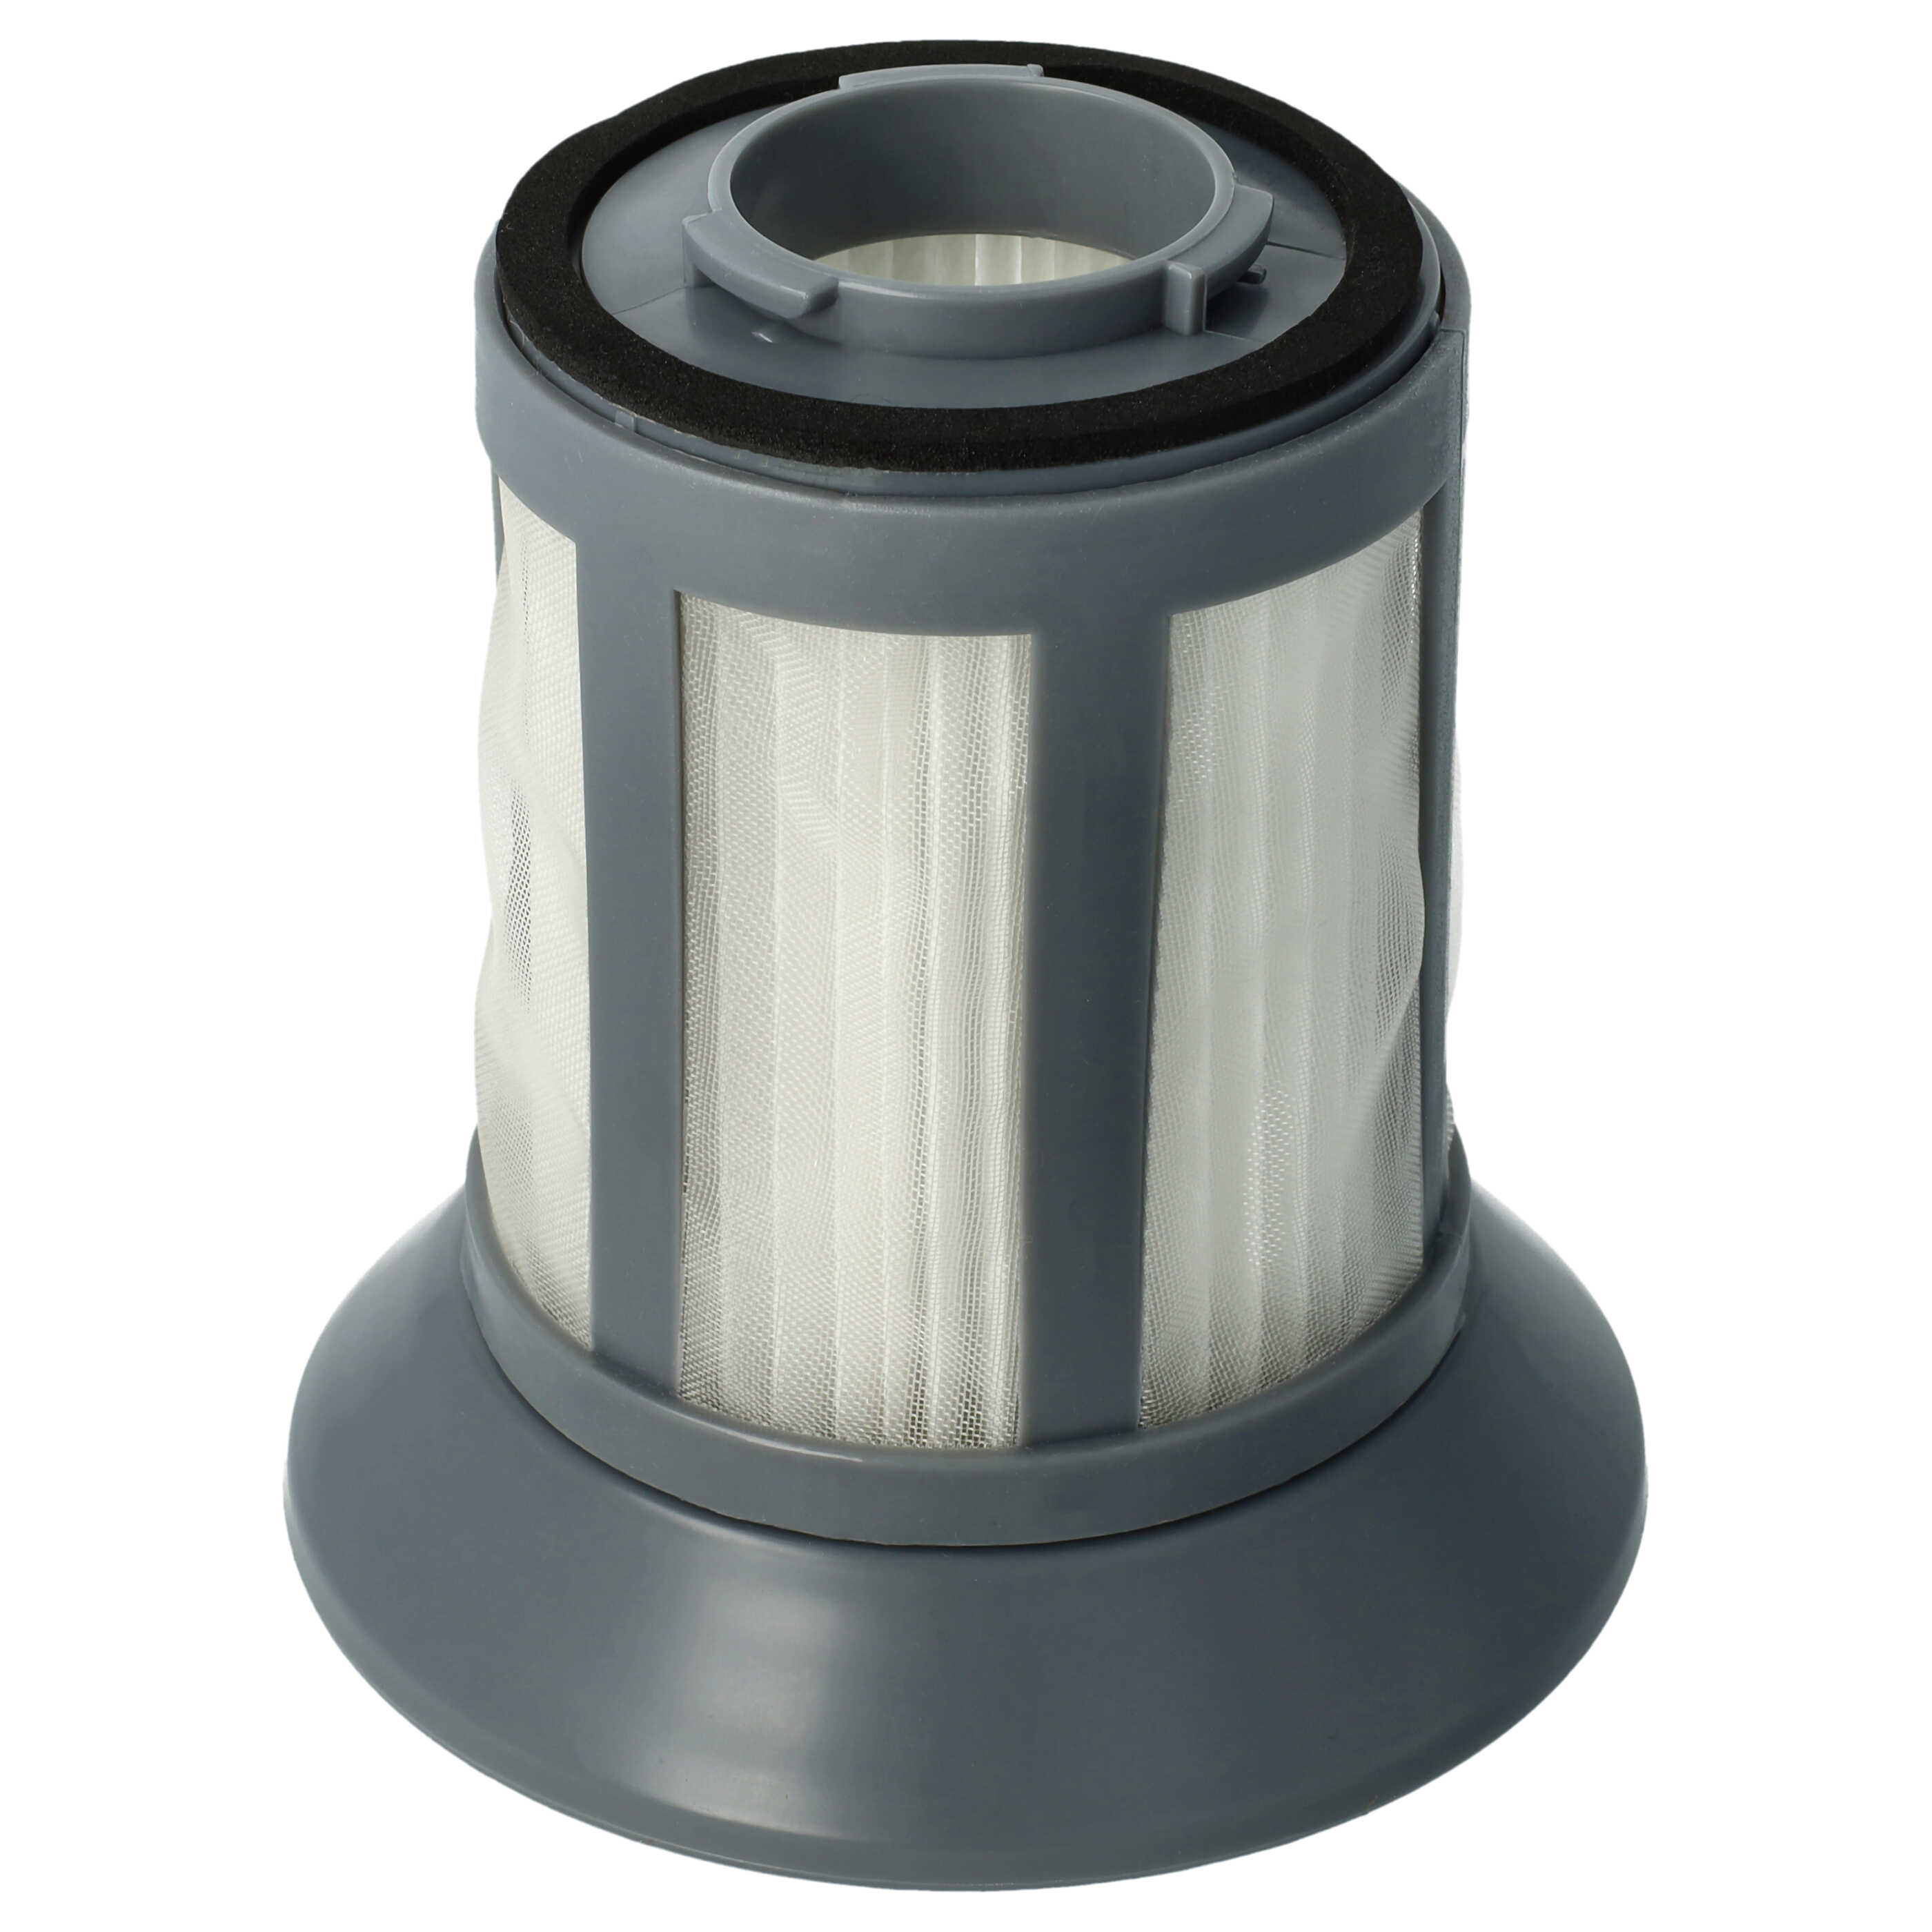 1x filter insert (nylon + HEPA filter) suitable for BS 9012 CB Eco Cyclon Bluesky Vacuum Cleaner